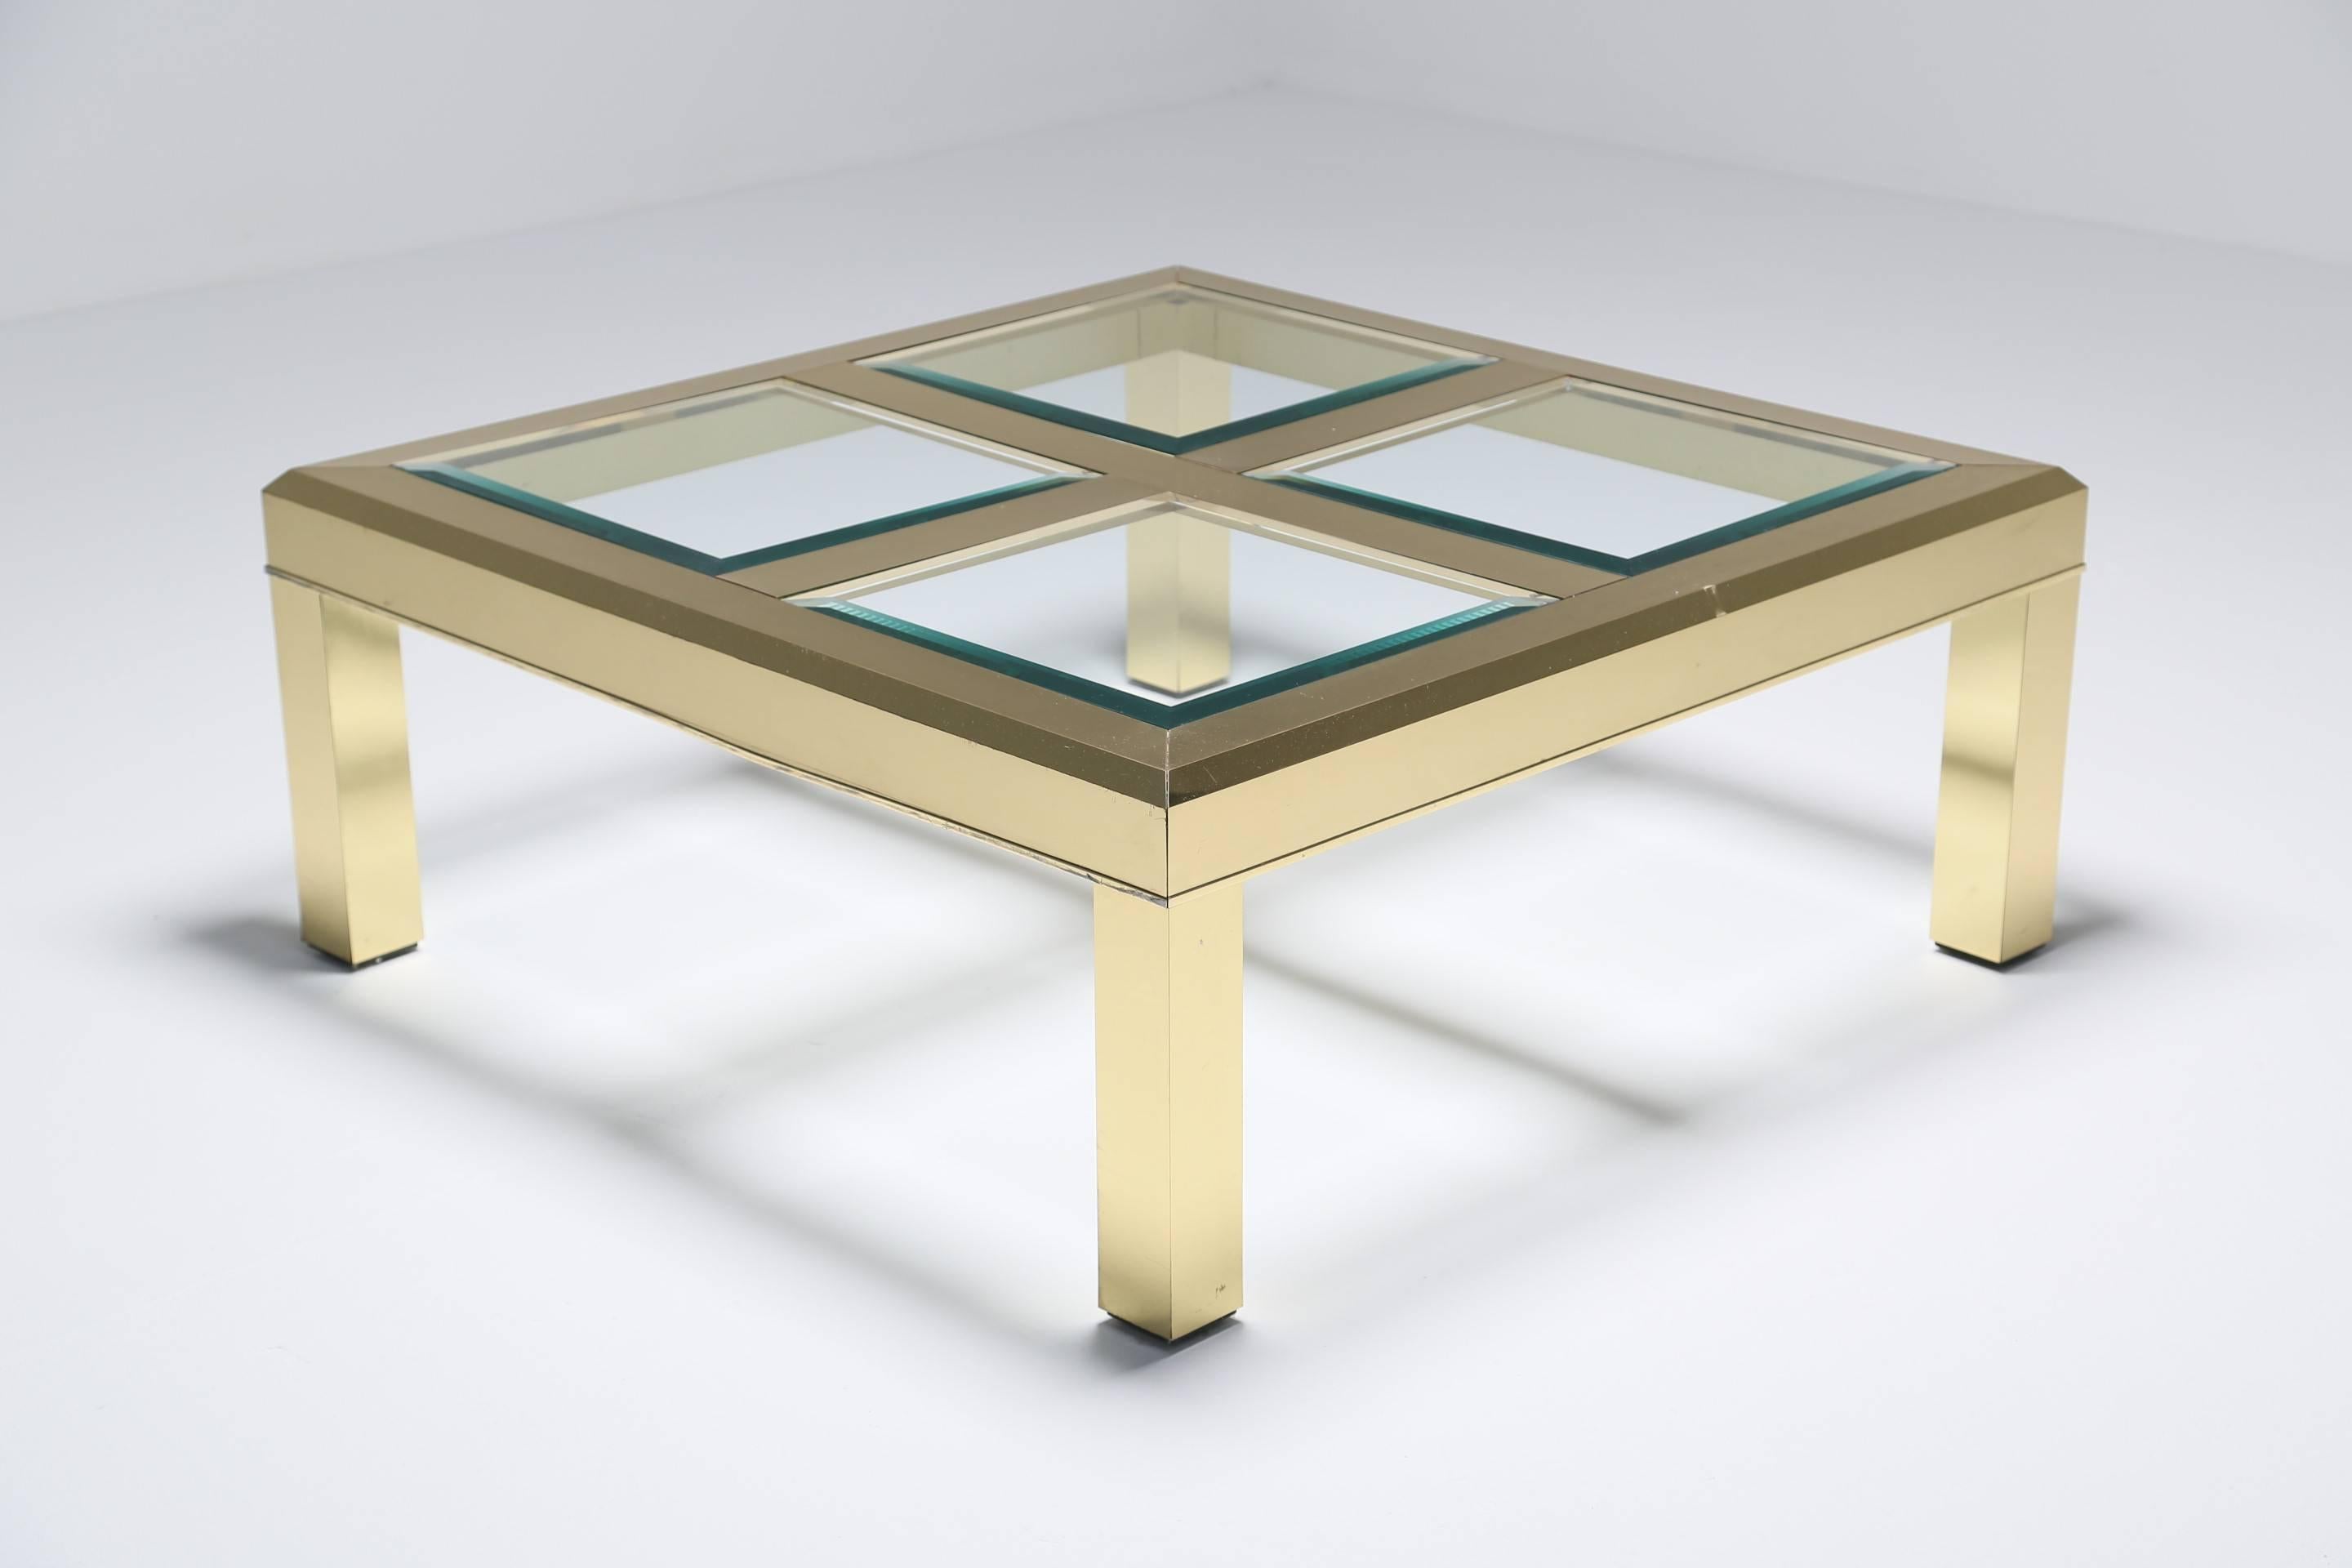 A smart Mastercraft style coffee table in faceted brass and beveled glass.. Simple yet functional in a generous size. 